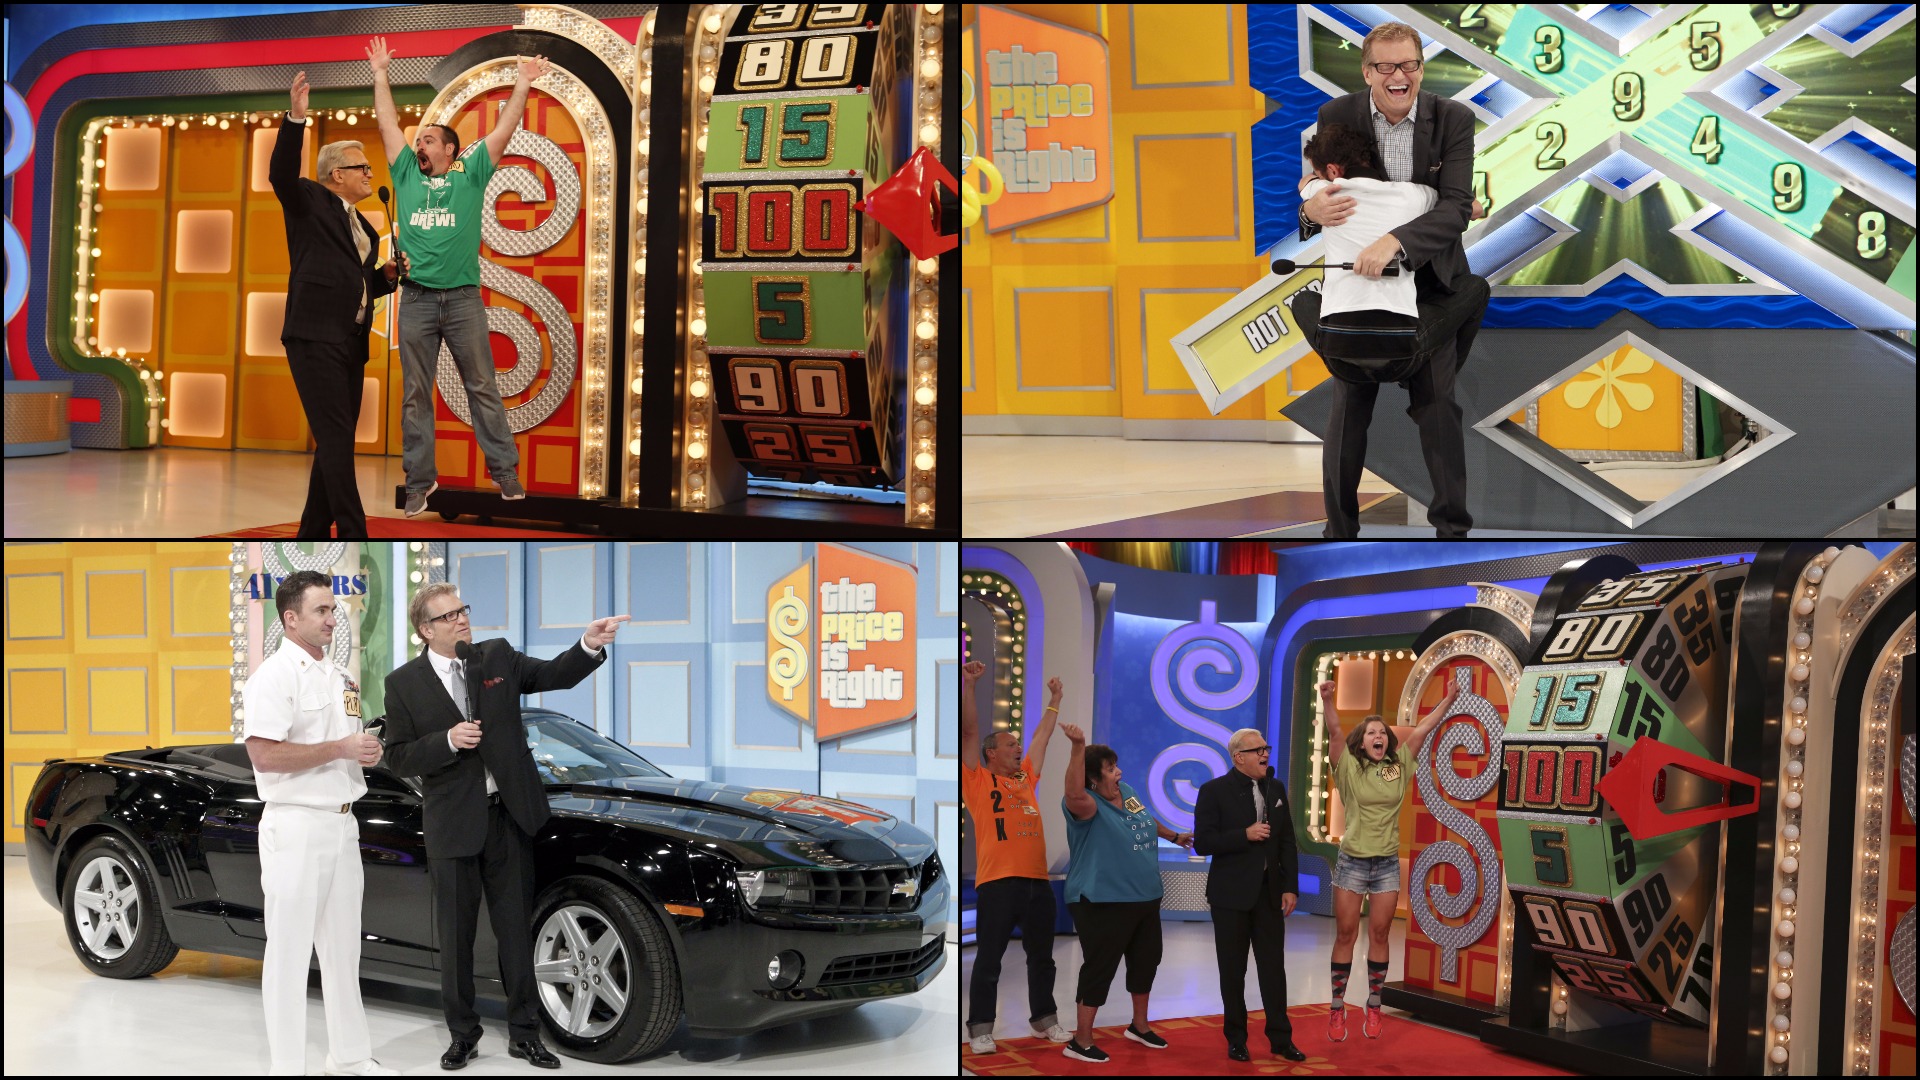 1. Drew has celebrated 10 years hosting The Price Is Right.